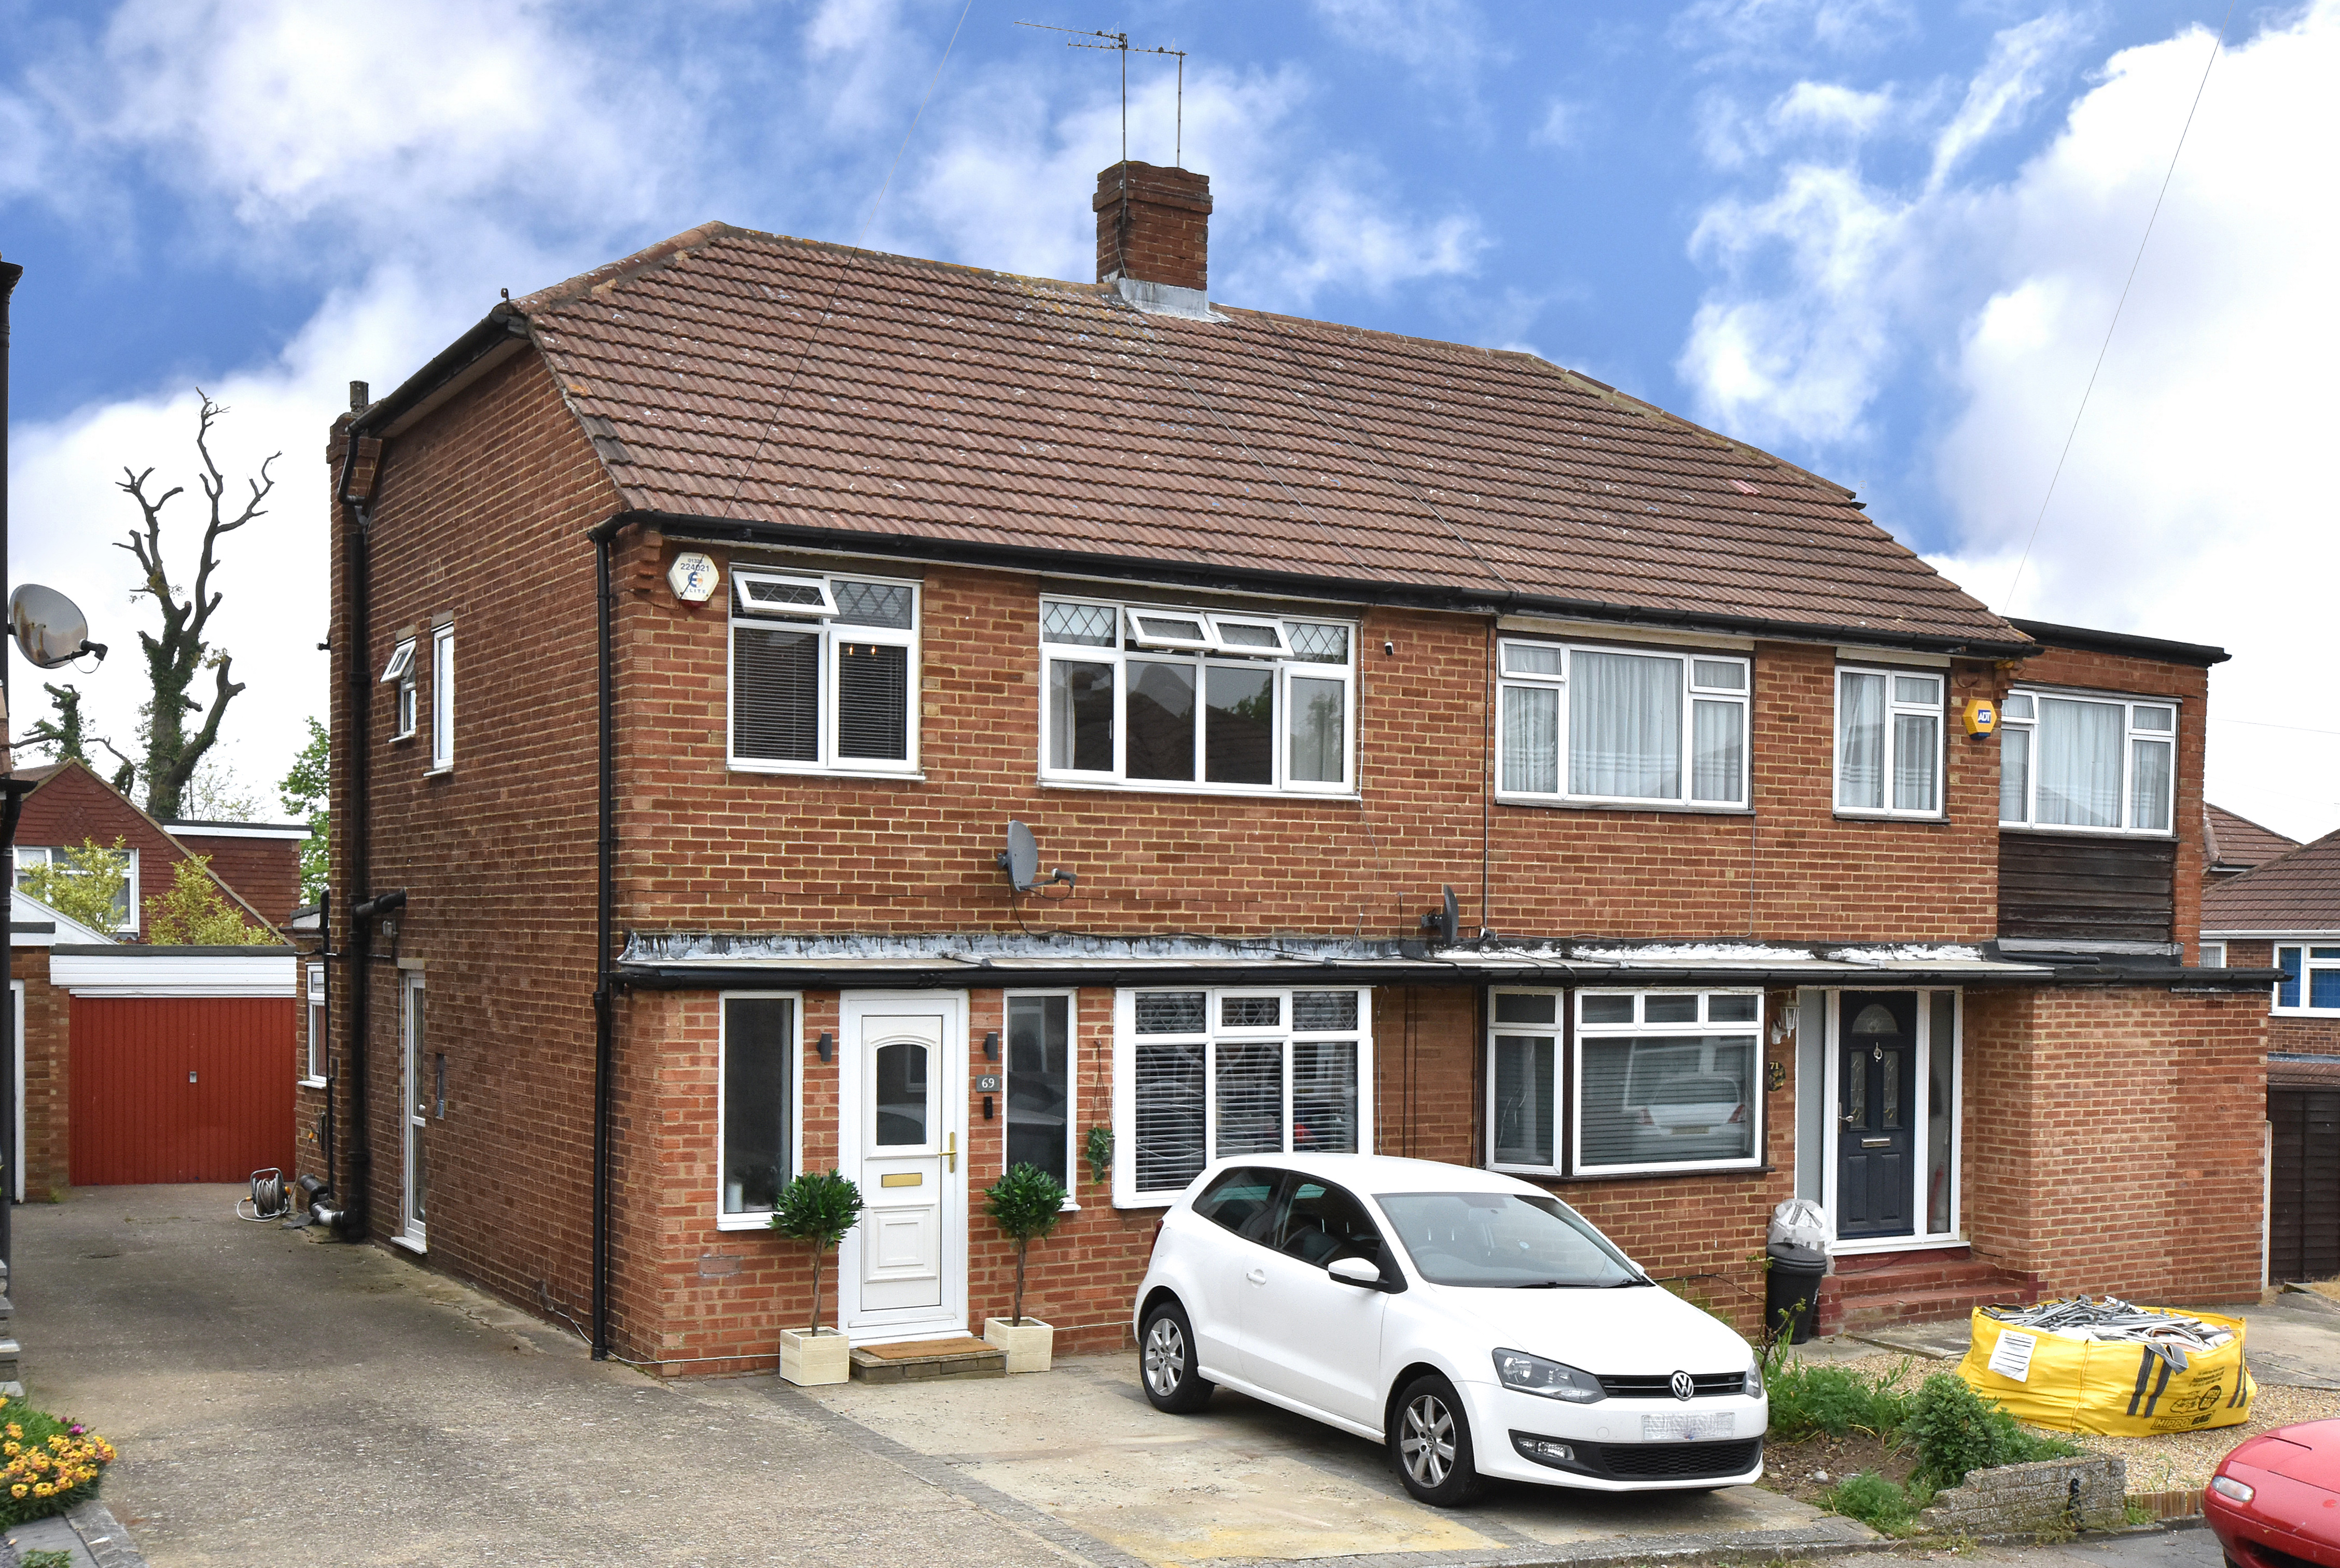 3 bed semi-detached house for sale in Dale Road, Swanley, BR8 